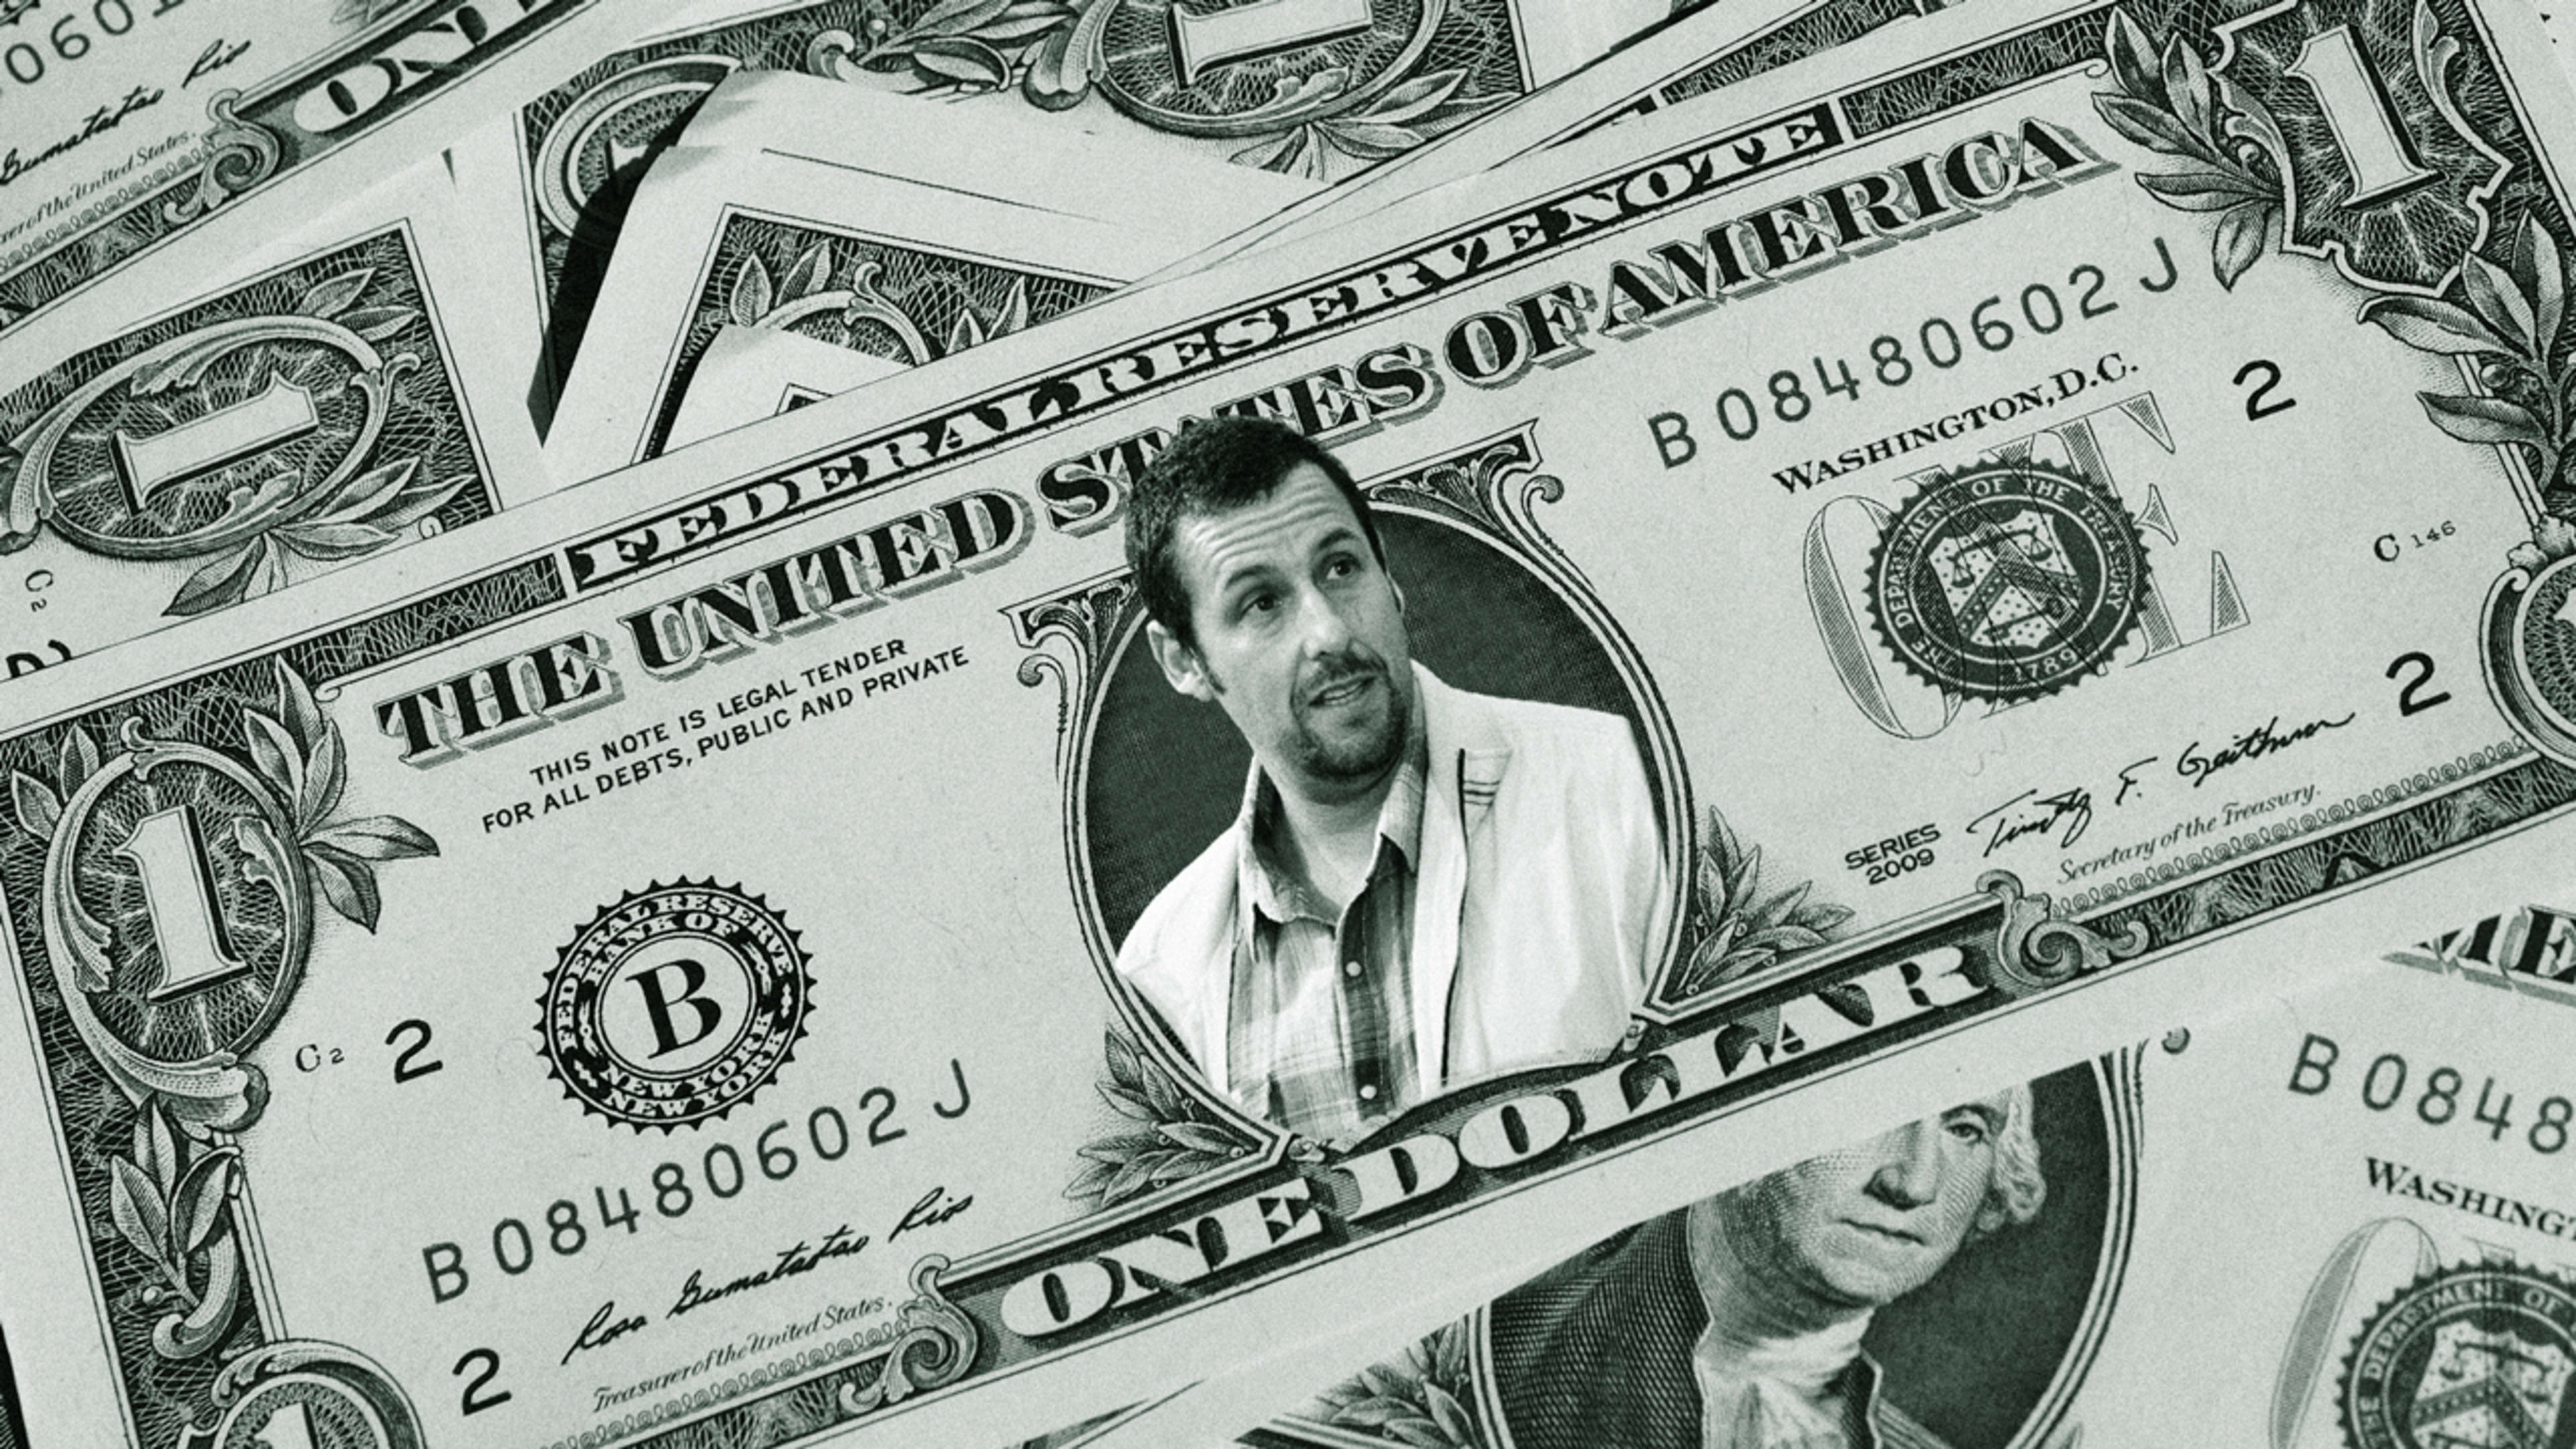 How an Adam Sandler movie may have briefly tanked the United Negro College Fund’s donations